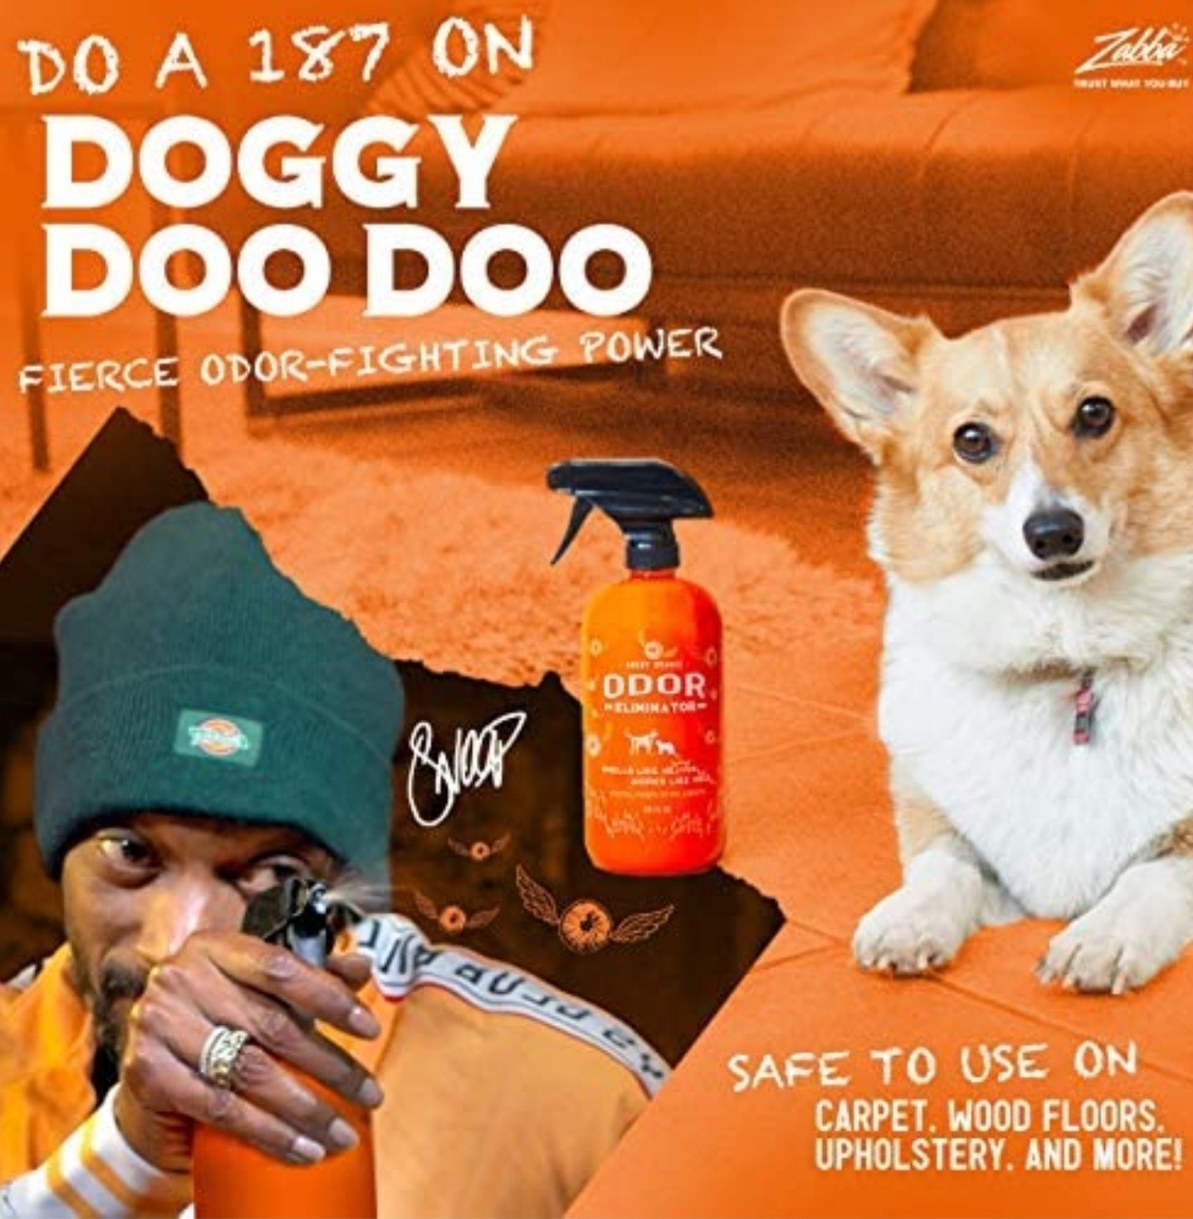 This is a real product that i just ordered thanks snoop - meme